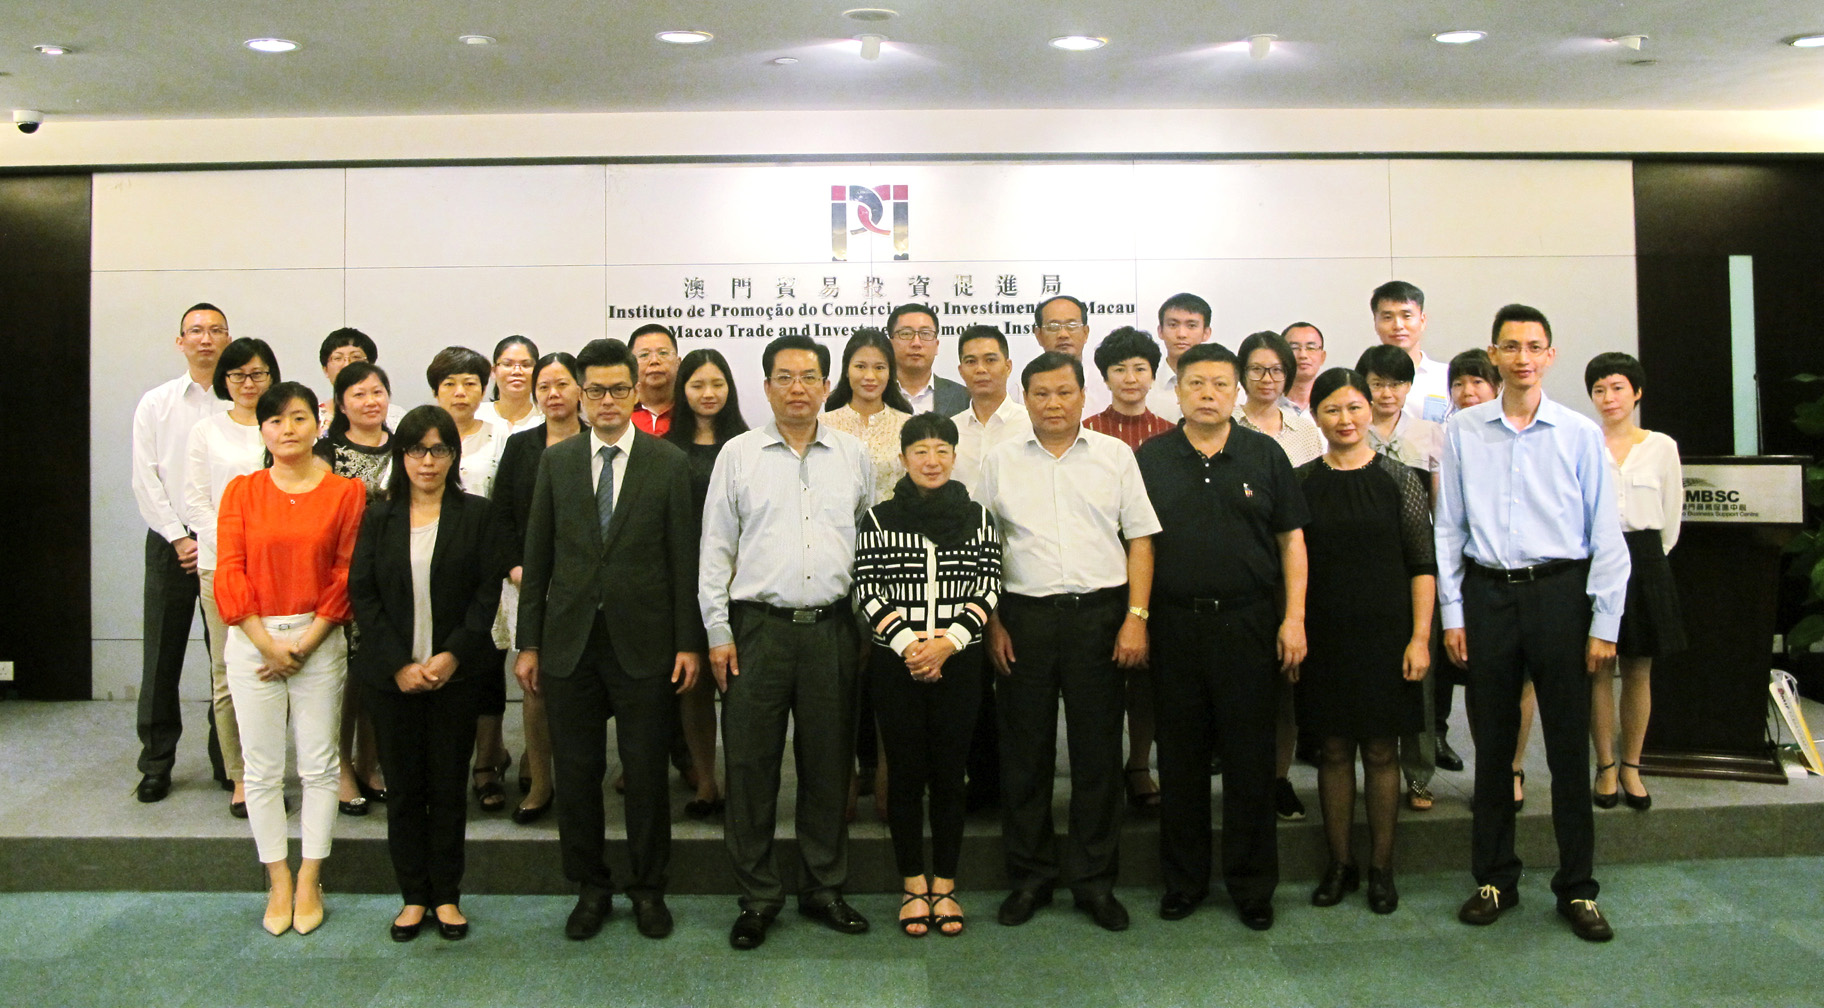 IPIM’s Executive Director Irene V. K. Lau with Deputy Counsel of Hong Kong and Macao Affairs Of ce of Hainan Province Fu Cun and the delegation at IPIM (4 July 2016)